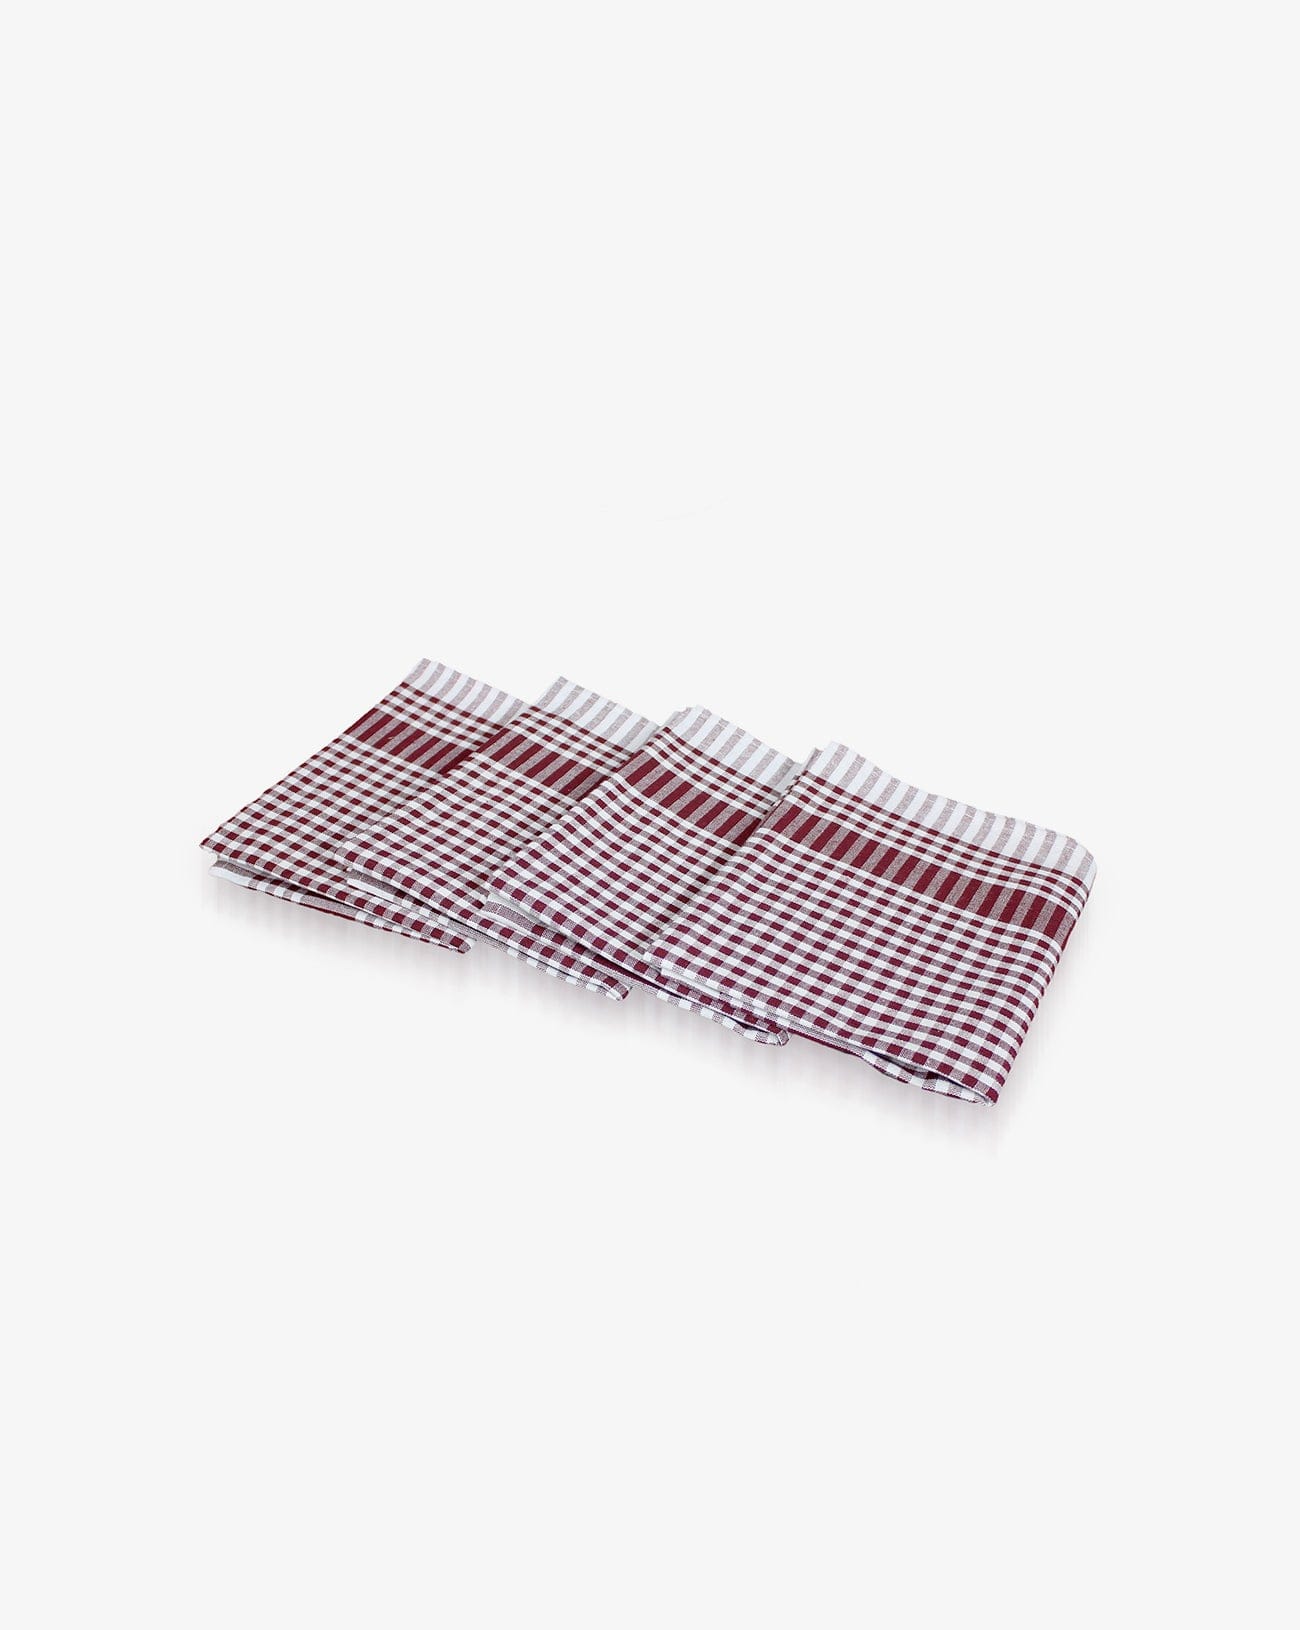 Checkered Kitchen Cotton Towels Folded Brown Texture Table Kitchenware  Kitchen Stock Photo by ©zver2334 657466848